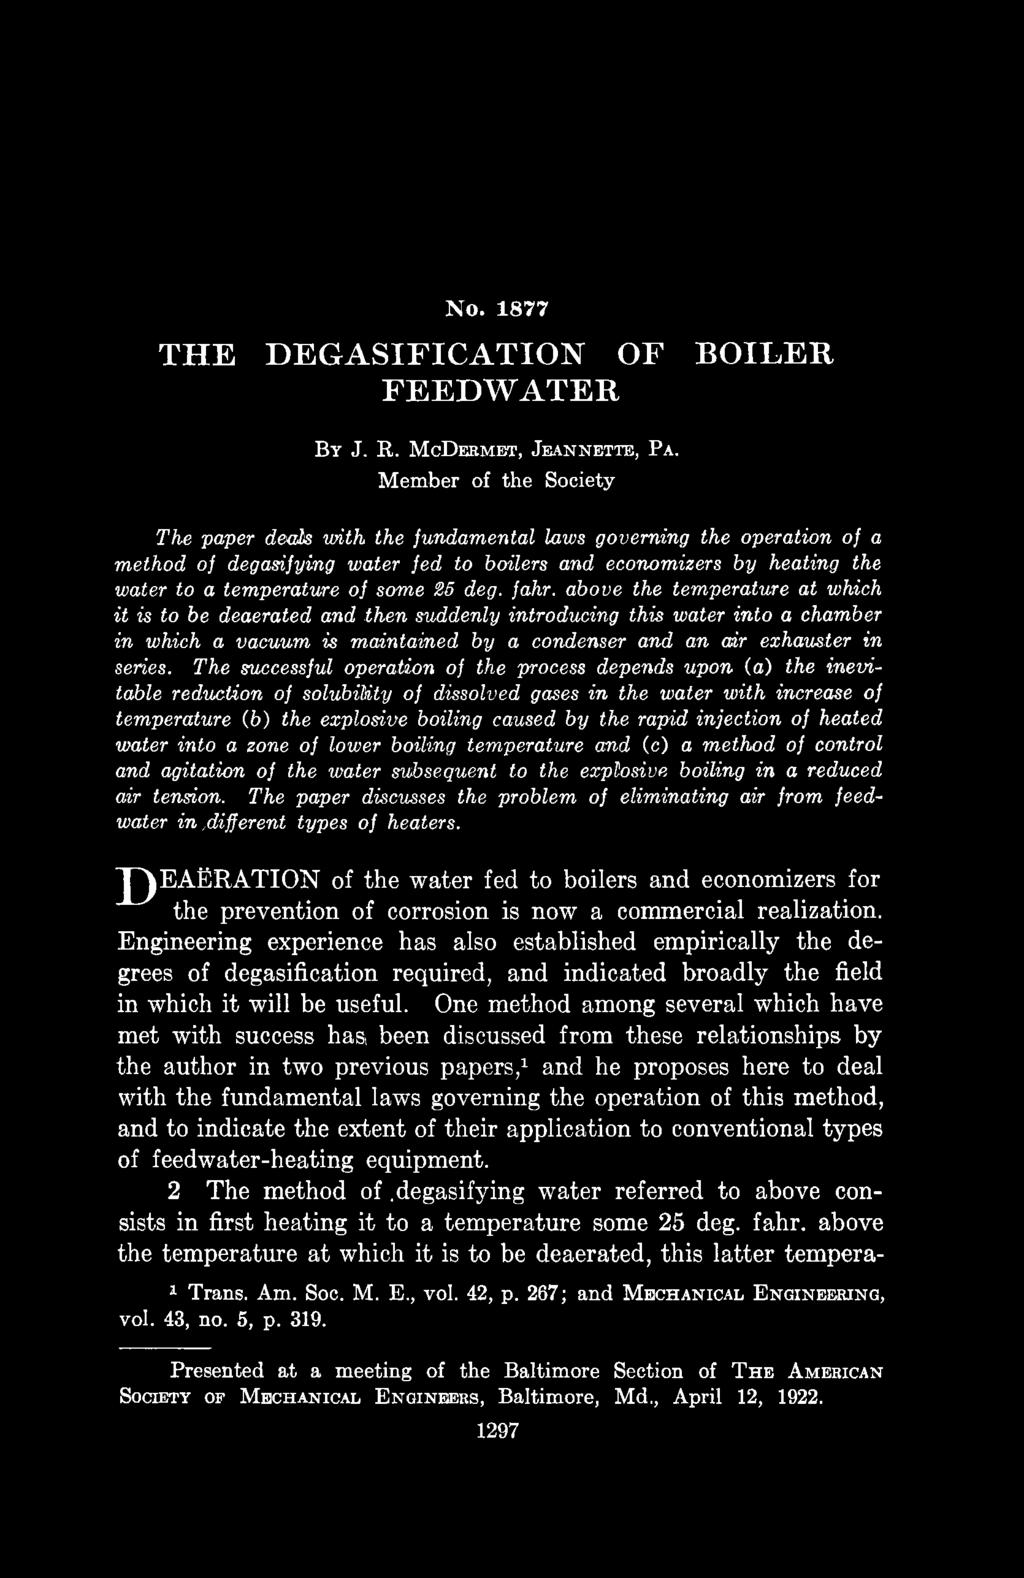 No. 1877 THE DEGASIFICATION OF BOILER FEEDW ATER B y J. R. M cd e r m e t, J e a n n e t t e, P a.